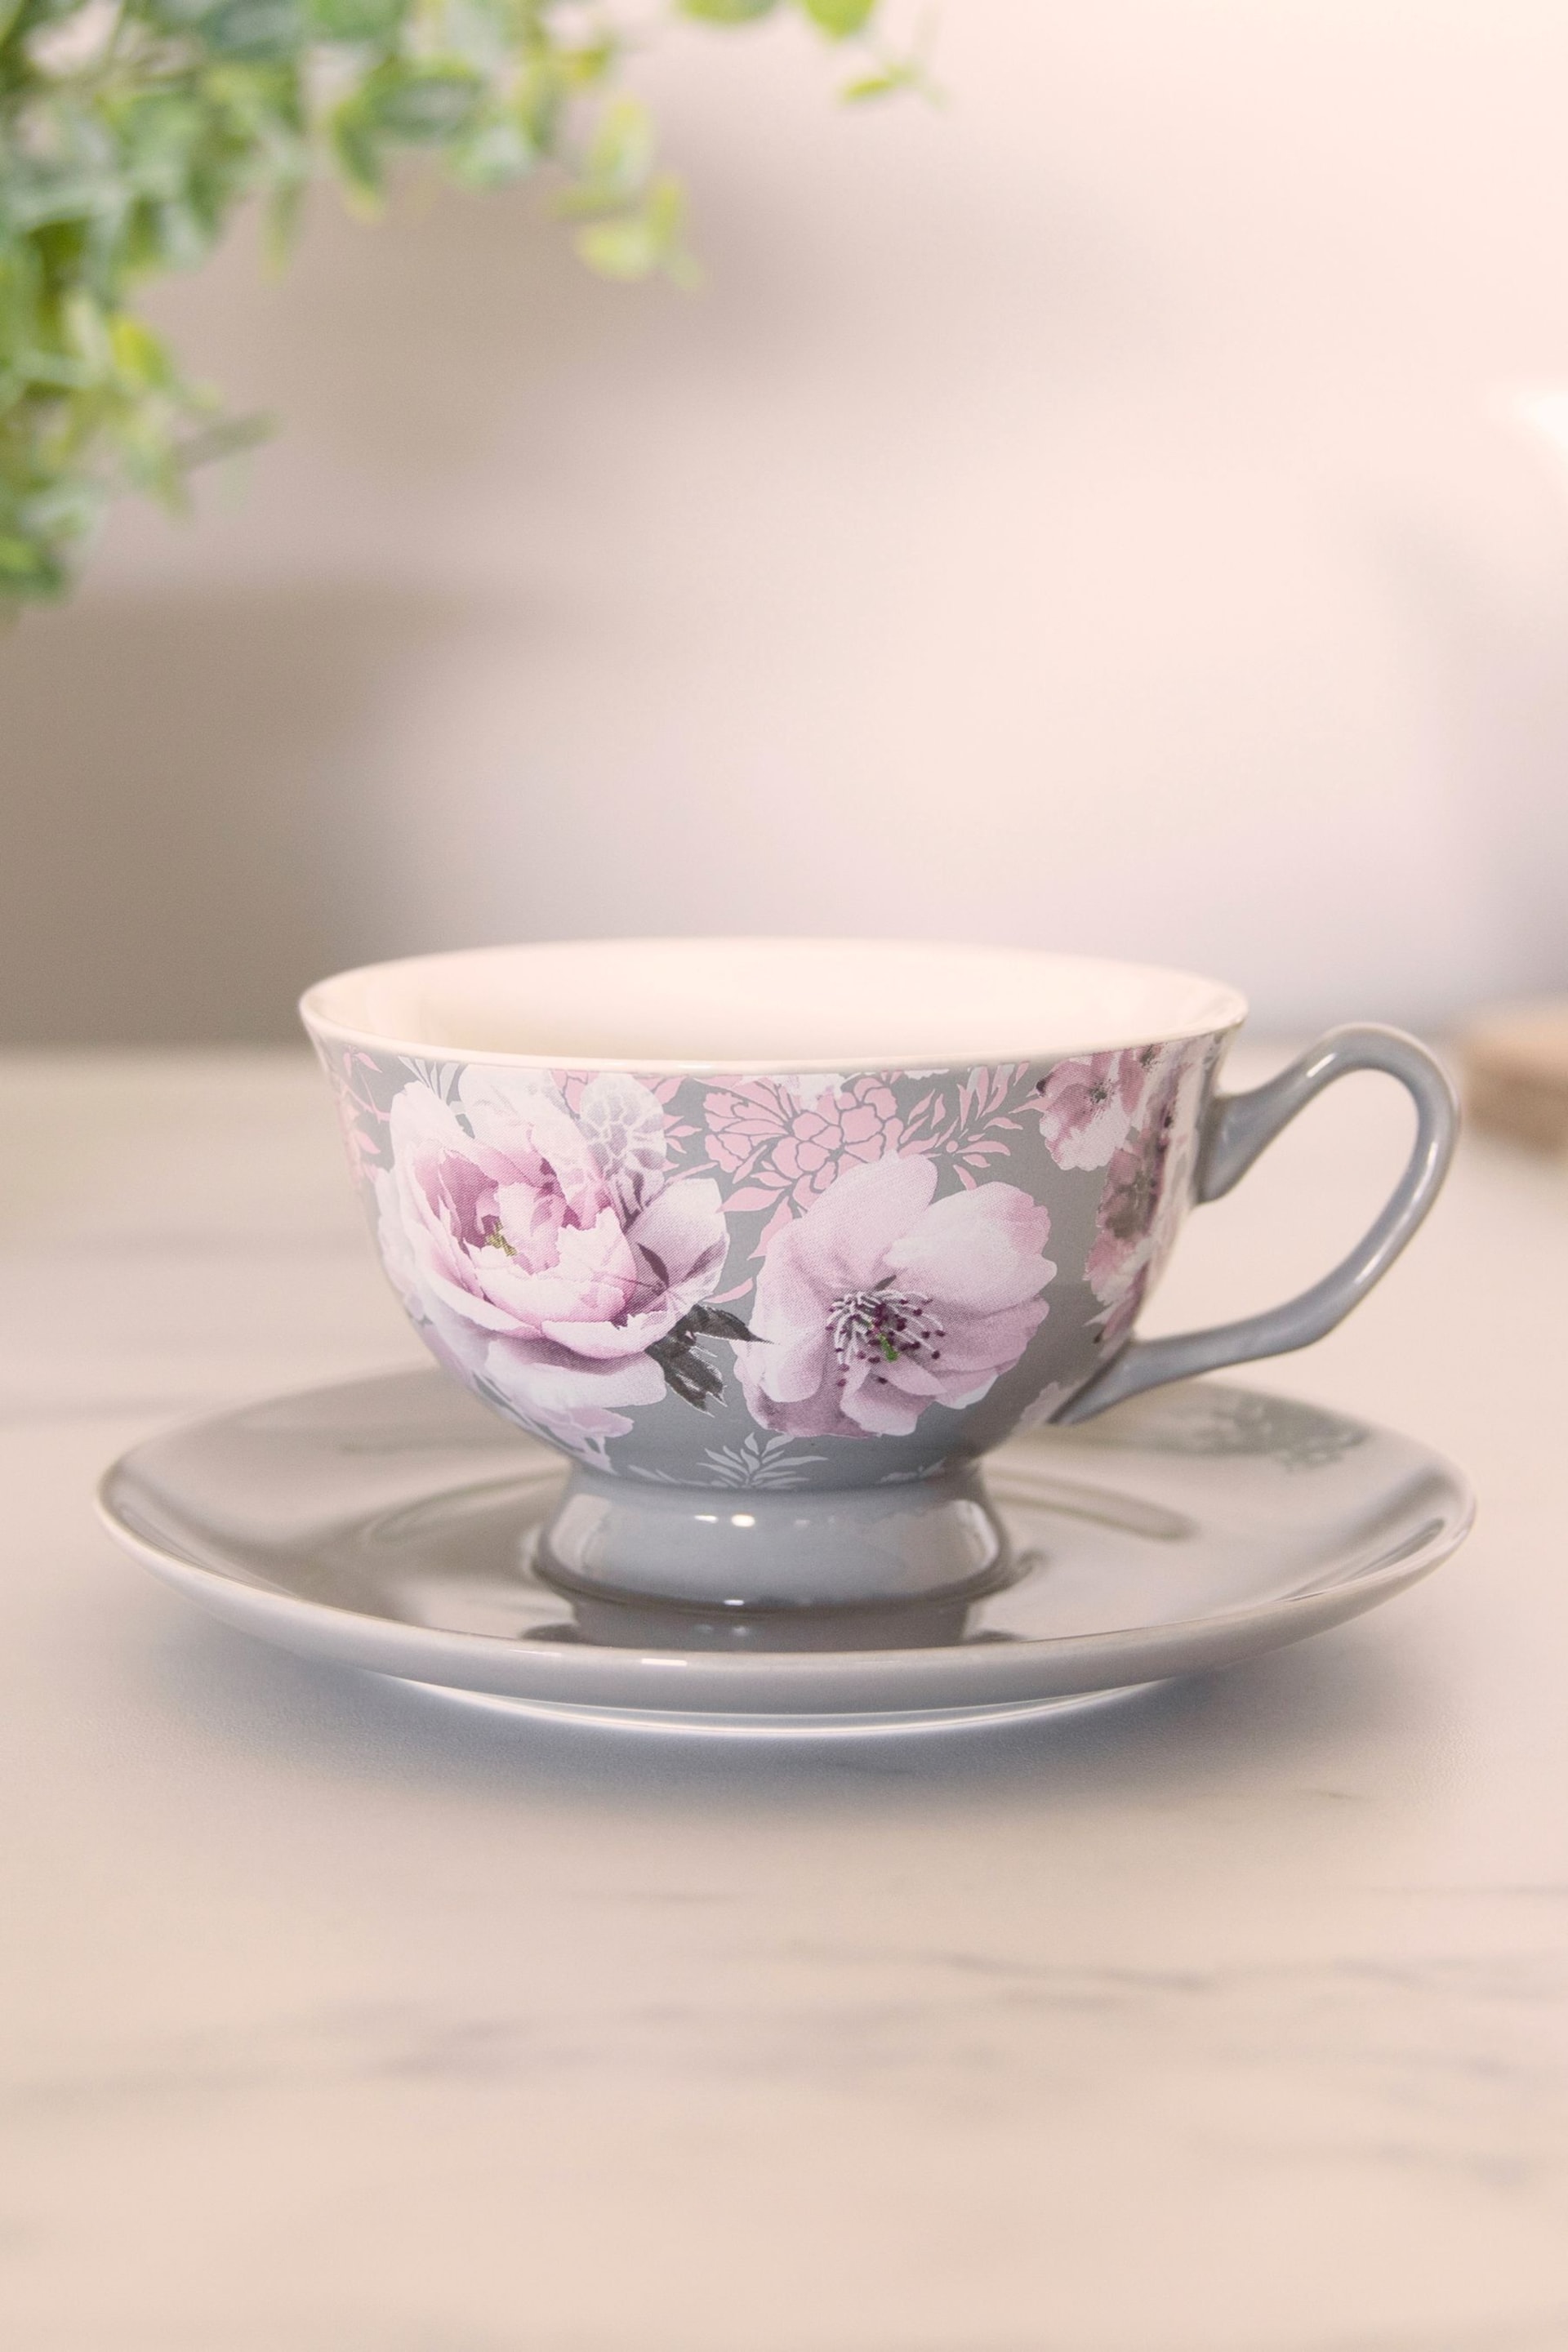 Catherine Lansfield Dramatic Floral Teacup & Saucer Set - Image 1 of 2